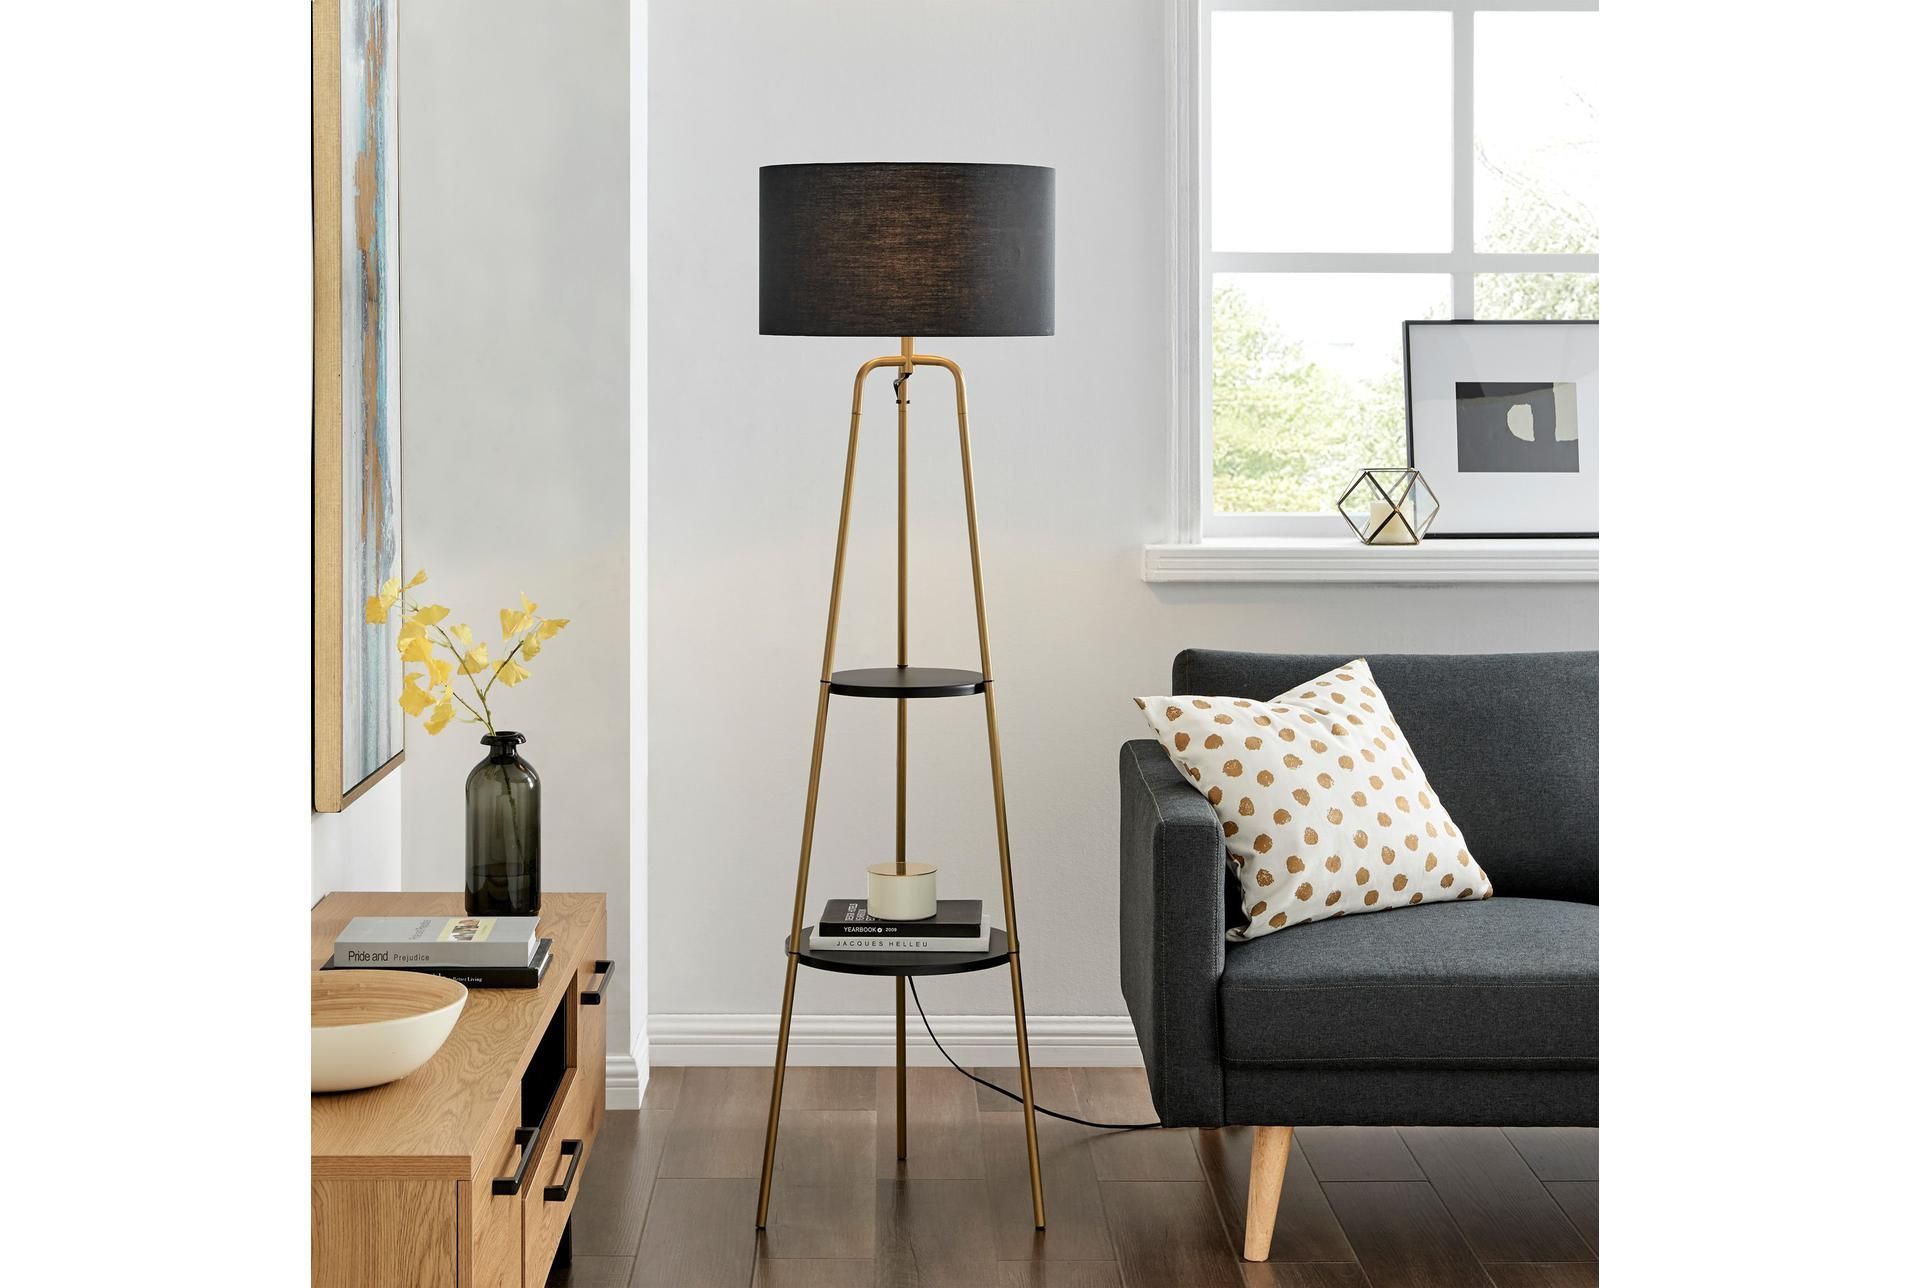 62 Inch Gold Metal + Black Shade Tripod Plant Stand Floor Lamp With 2 Tier  Table | Floor Lamp, Living Table, Shades Of Black Intended For Floor Lamps With 2 Tier Table (View 2 of 15)